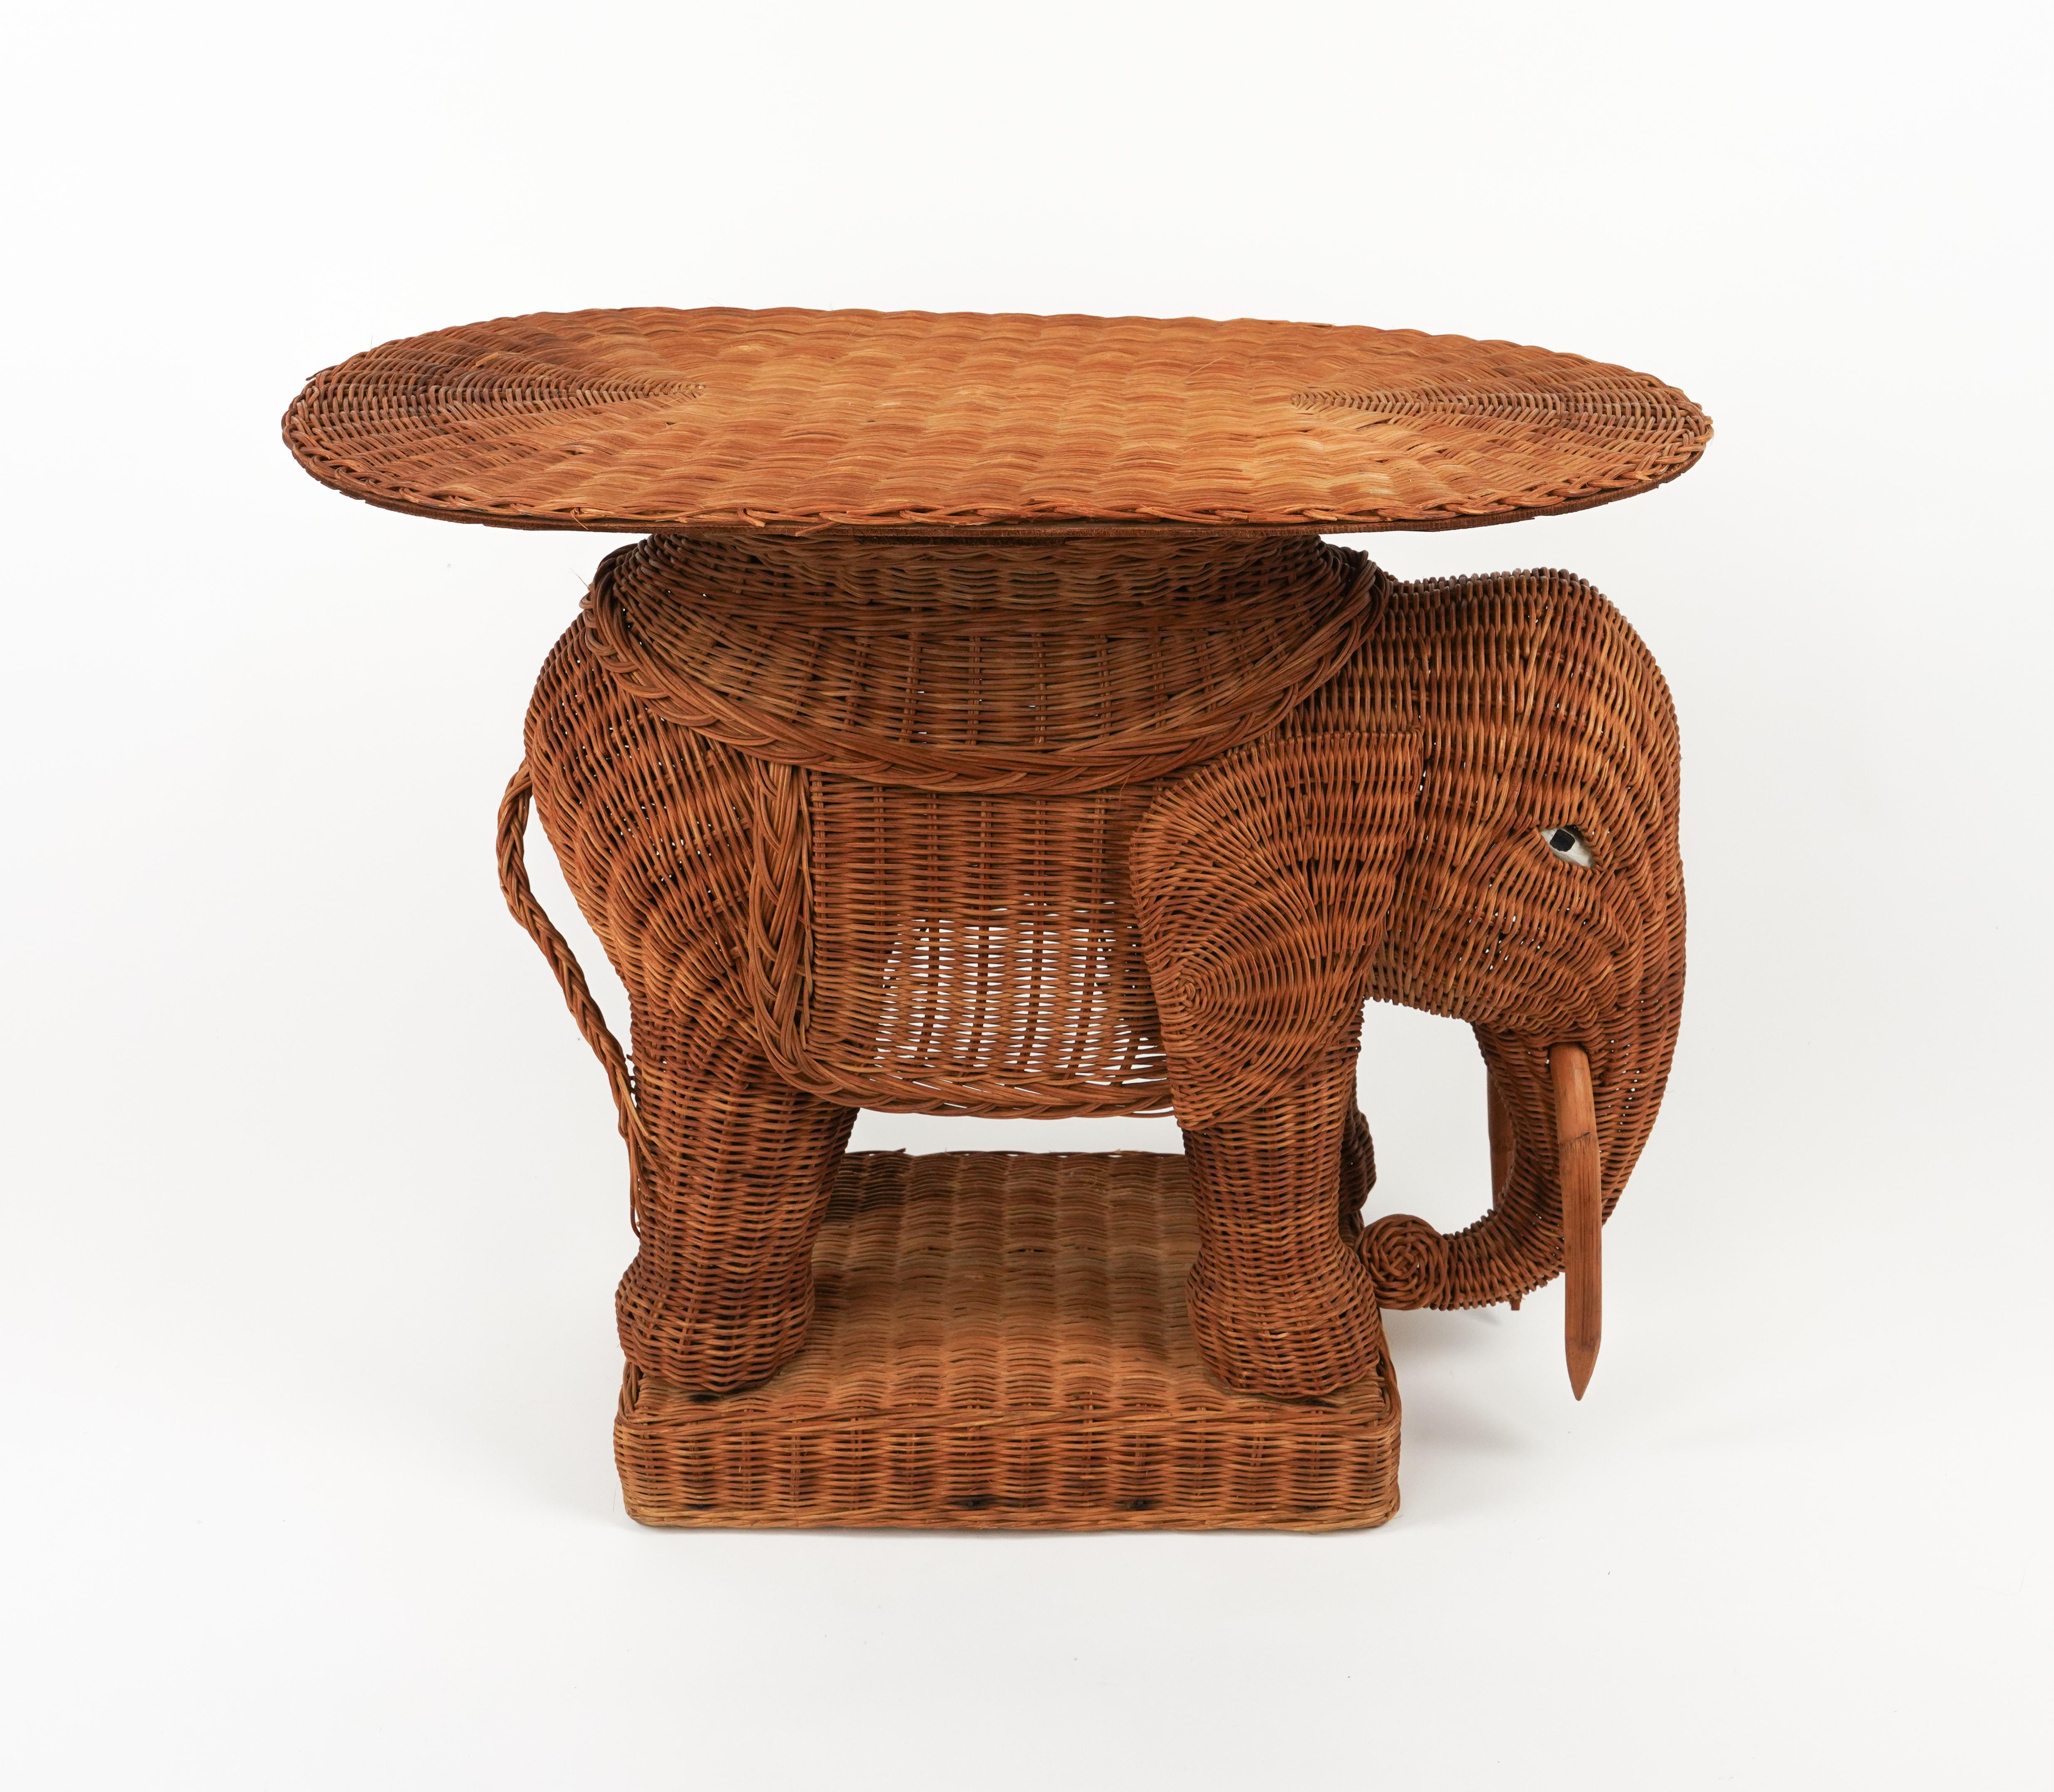 Amazing Midcentury Elephant-shaped coffee table / side table in hand-braided rattan with wood tusks in the style of Vivai Del Sud.

It also has a removable wicker tray on top of it.

Made in Italy in the 1960s.

Vivai del sud, Gabriella Crespi and